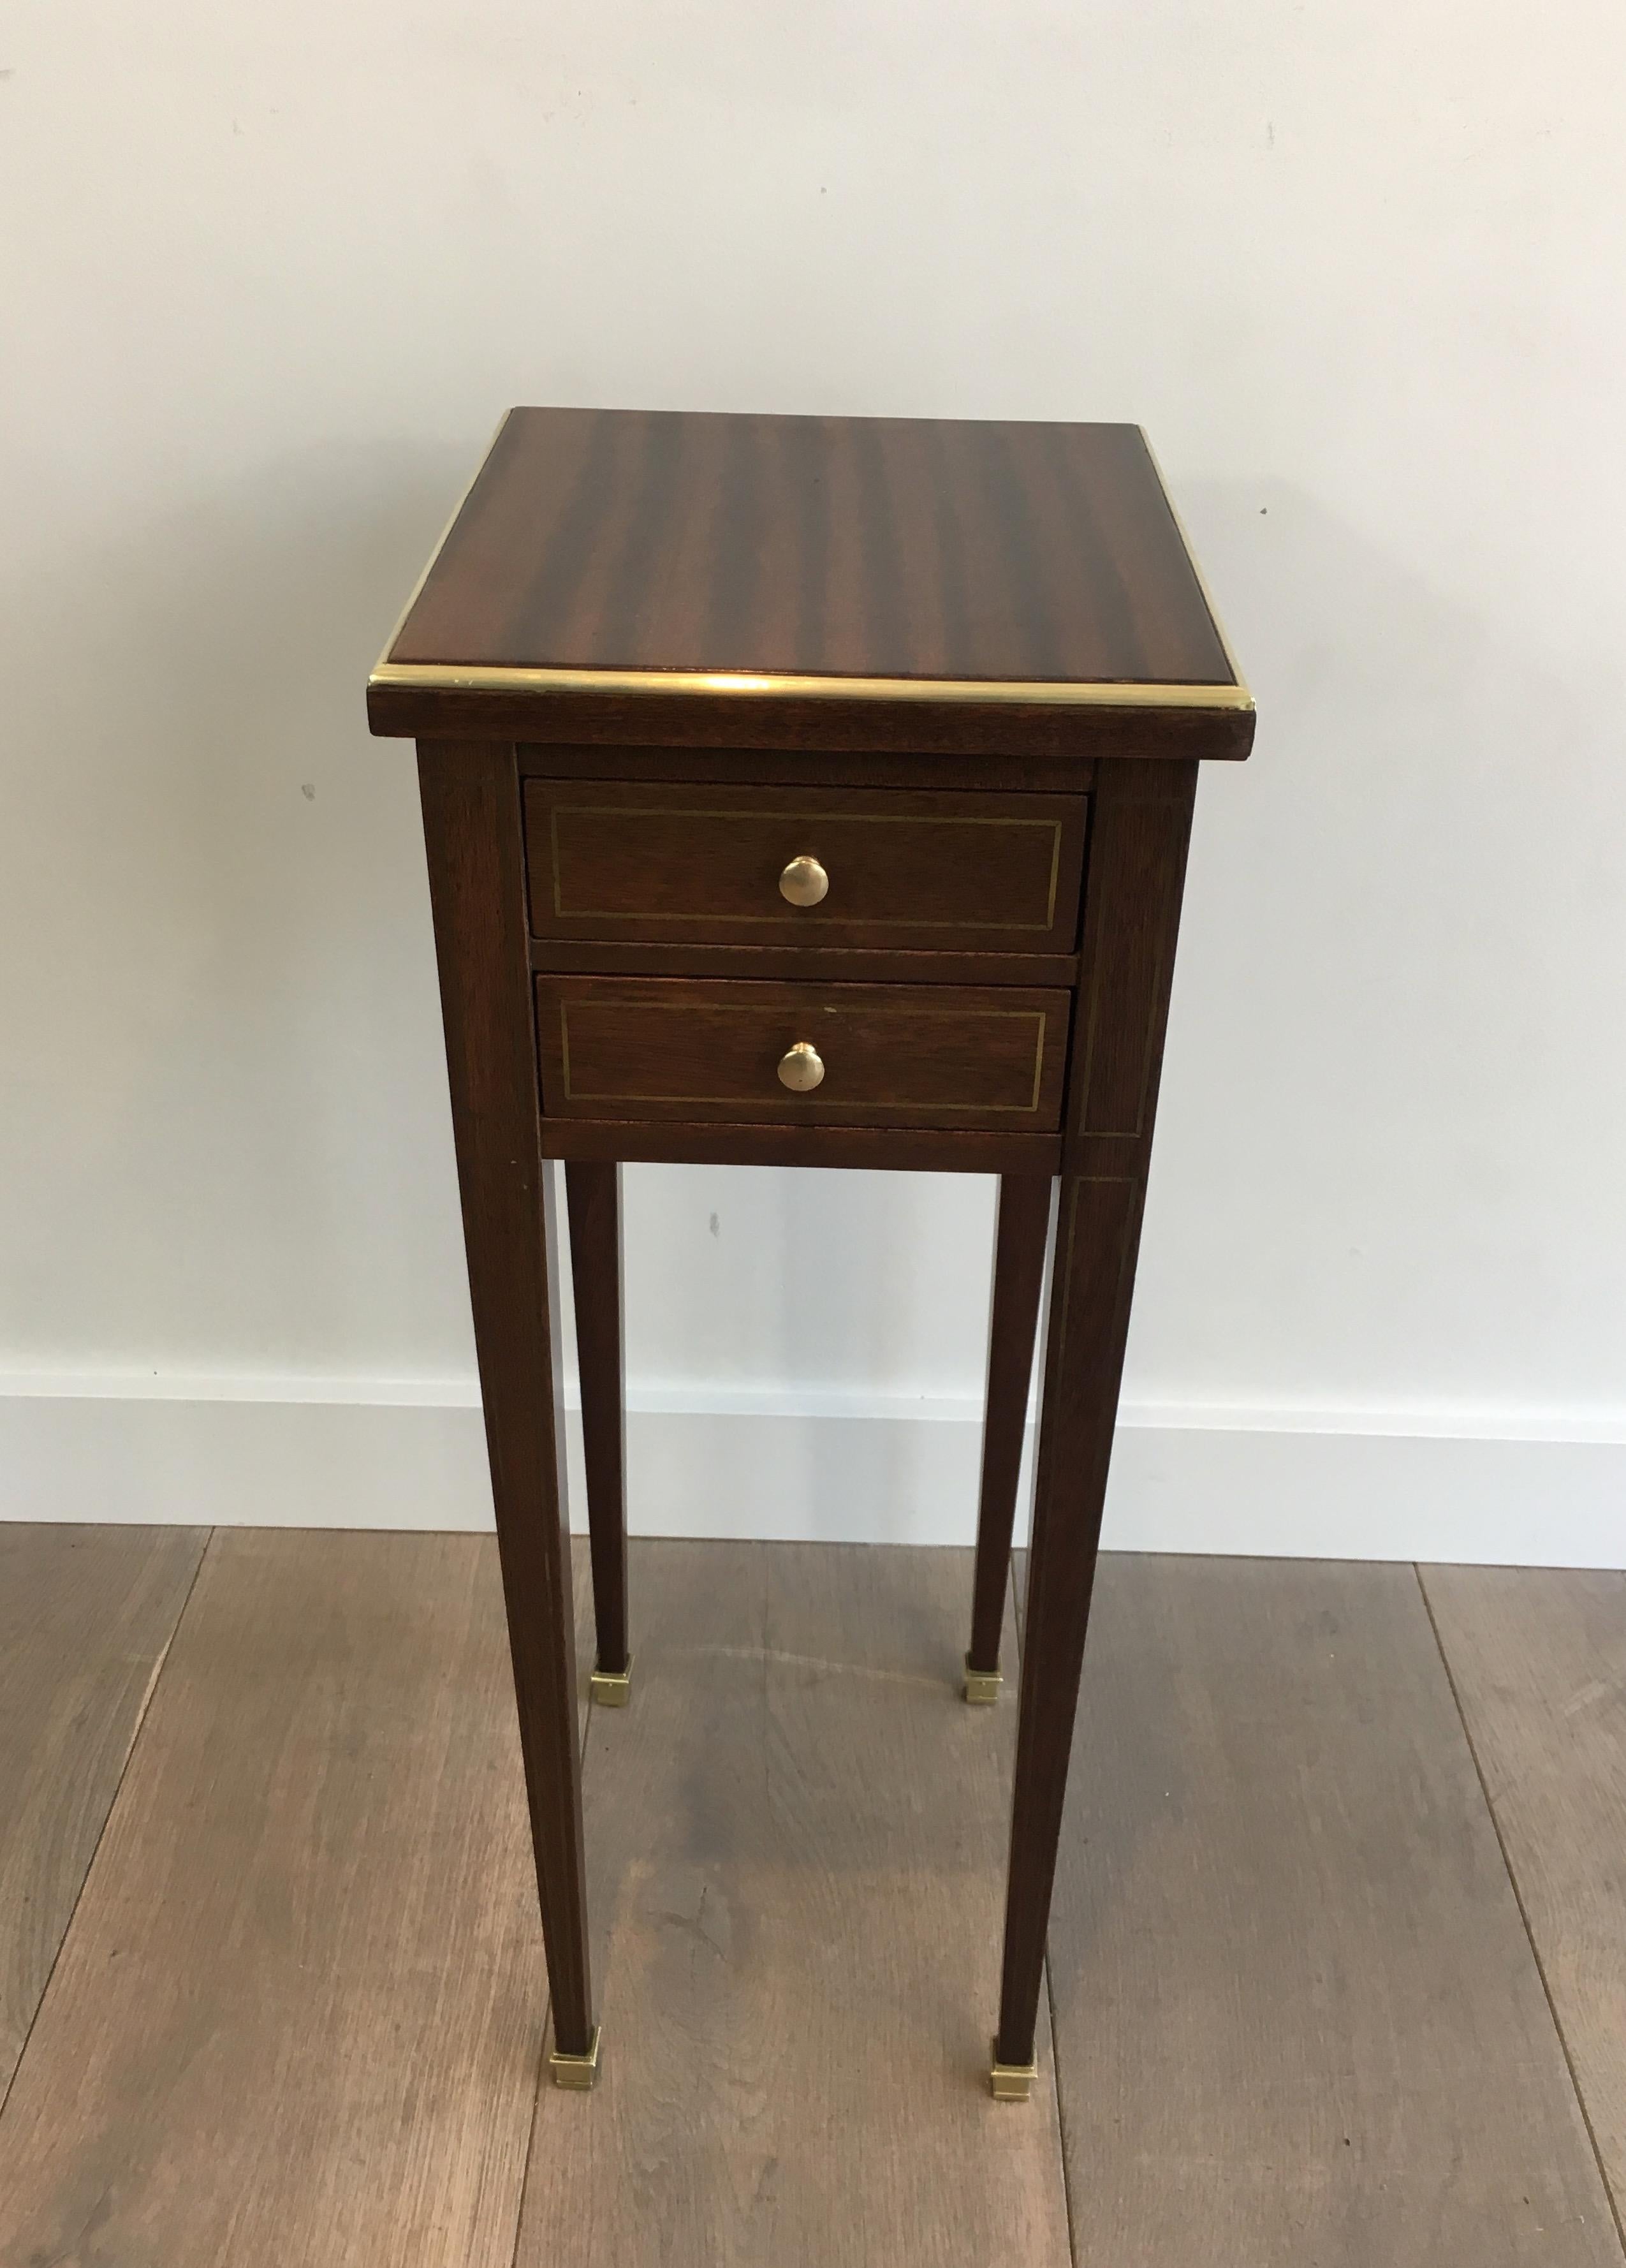 Brass Unusual Neoclassical Small Drawers Table with Sliding Ashtrays